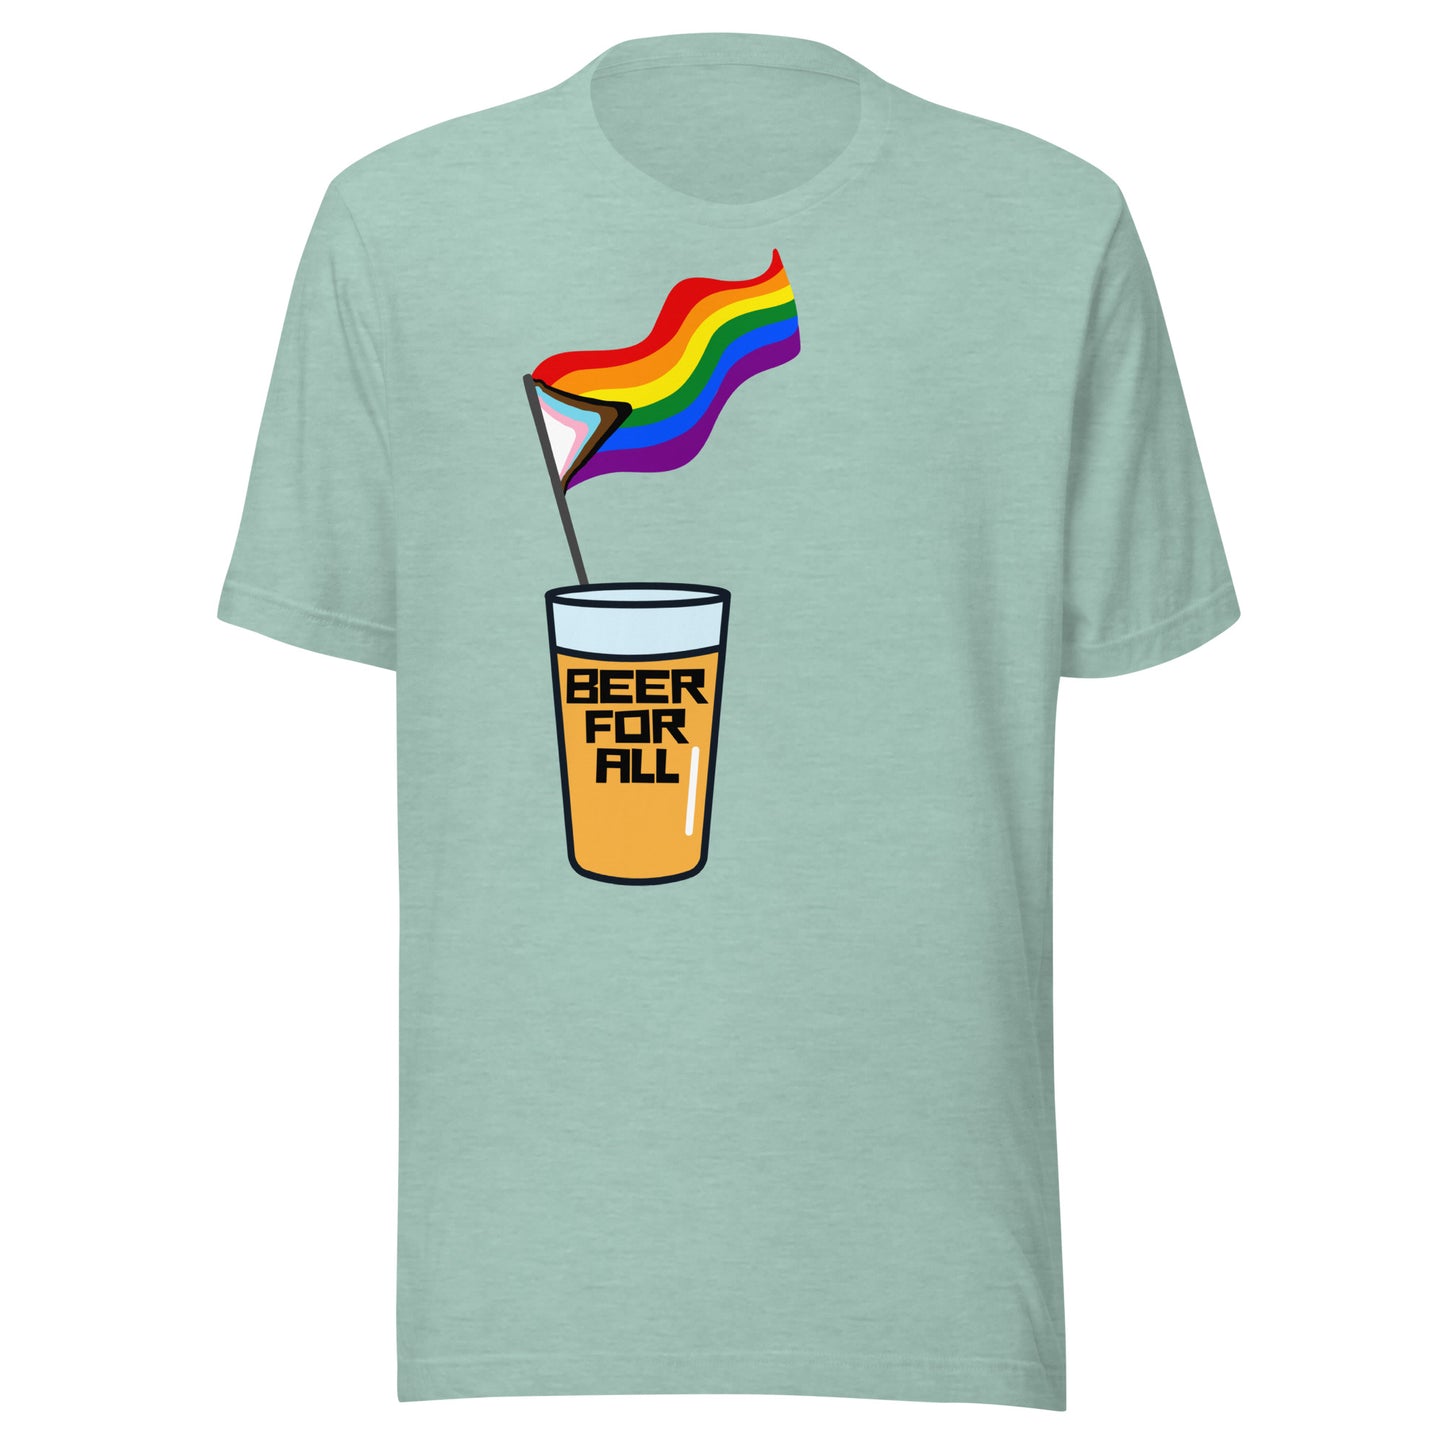 Beer For All Uni-sexy soft style tee